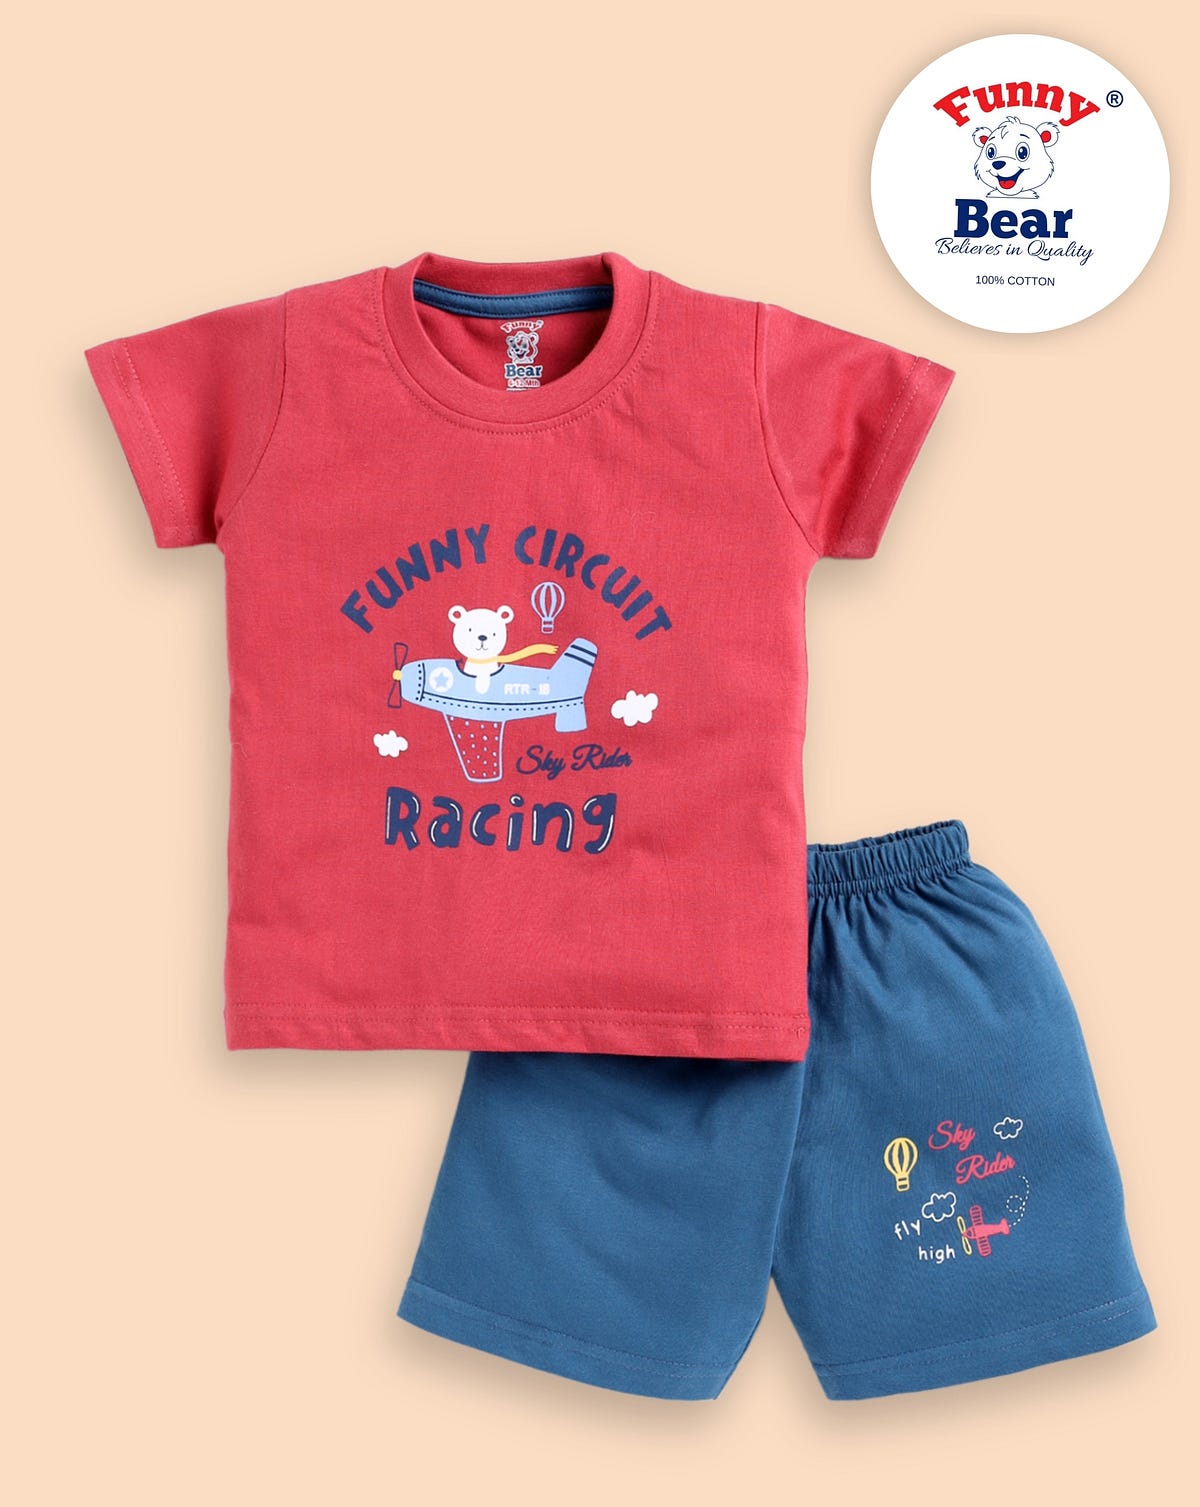 Wholesale baby clothes, kids clothes in Gurgaon | kidfactory.in ...